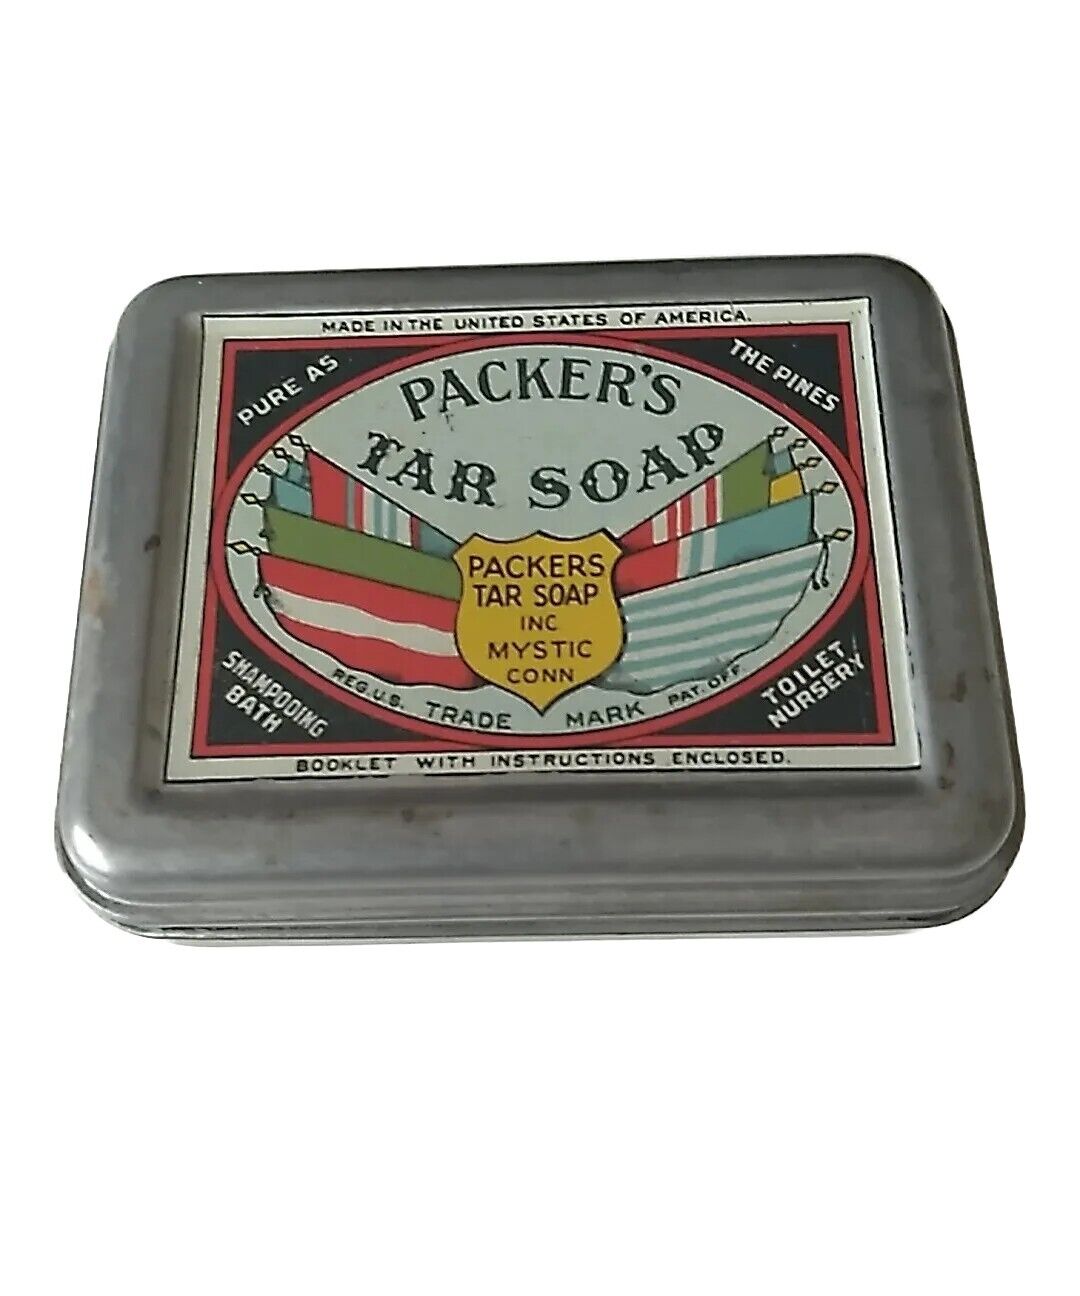 Vintage 1939 Packer's Tar Soap Tin Box Container Advertising Mystic Conn